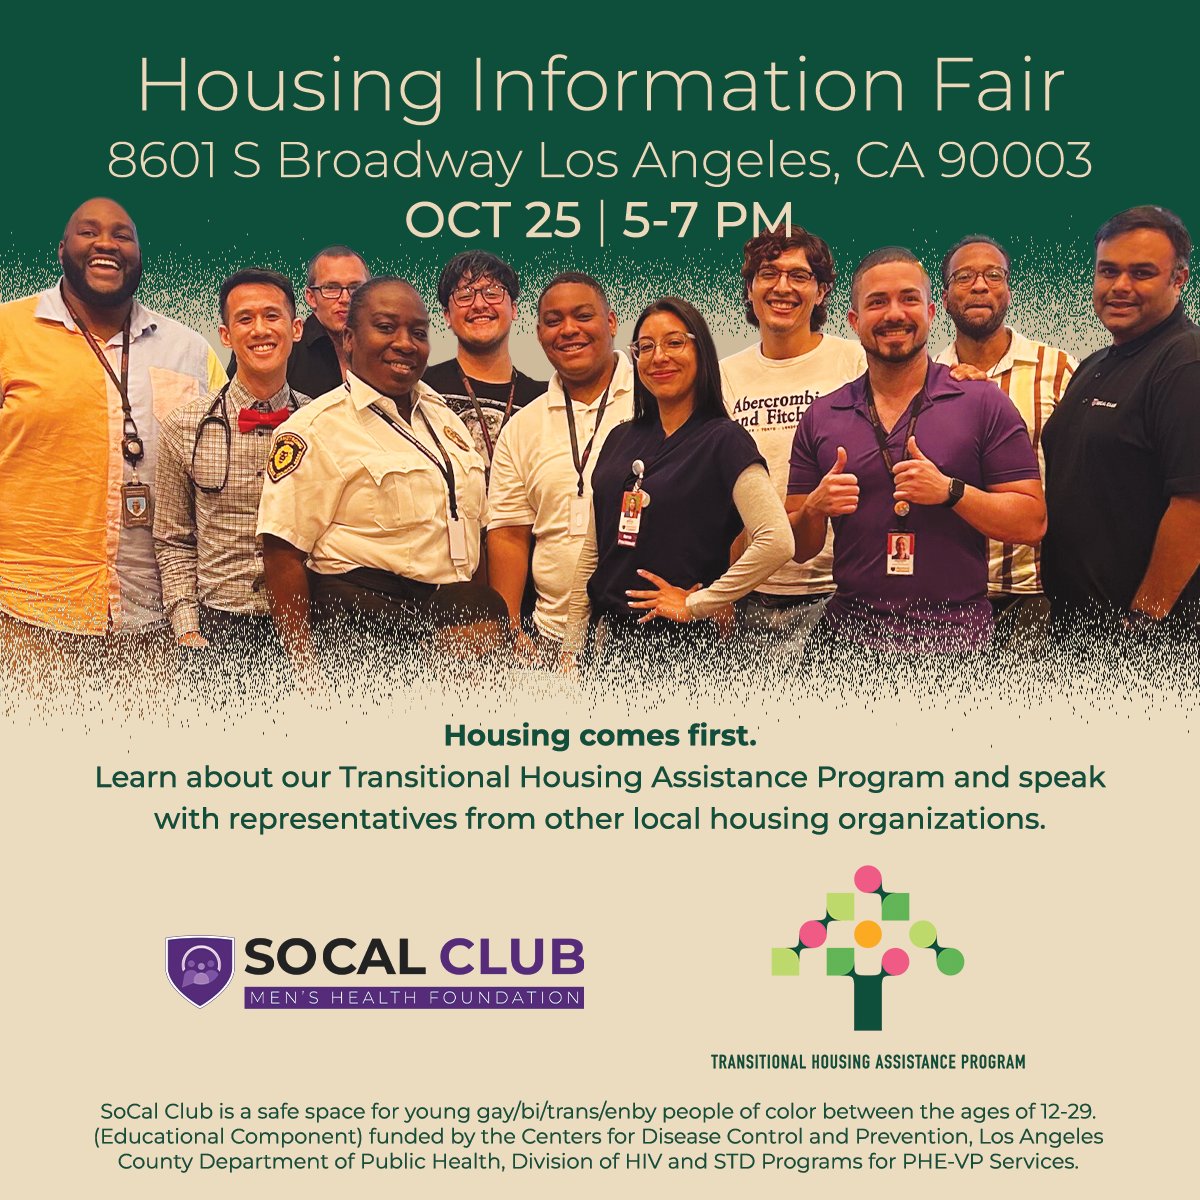 No one deserves to be in the dark when it comes to housing. Join us for our housing fair to hear from local housing organizations and our Transitional Housing Assistance Program! 💚🤝💚

#socalclub #southla #gaysouthla #housing #transitionalhousing #community